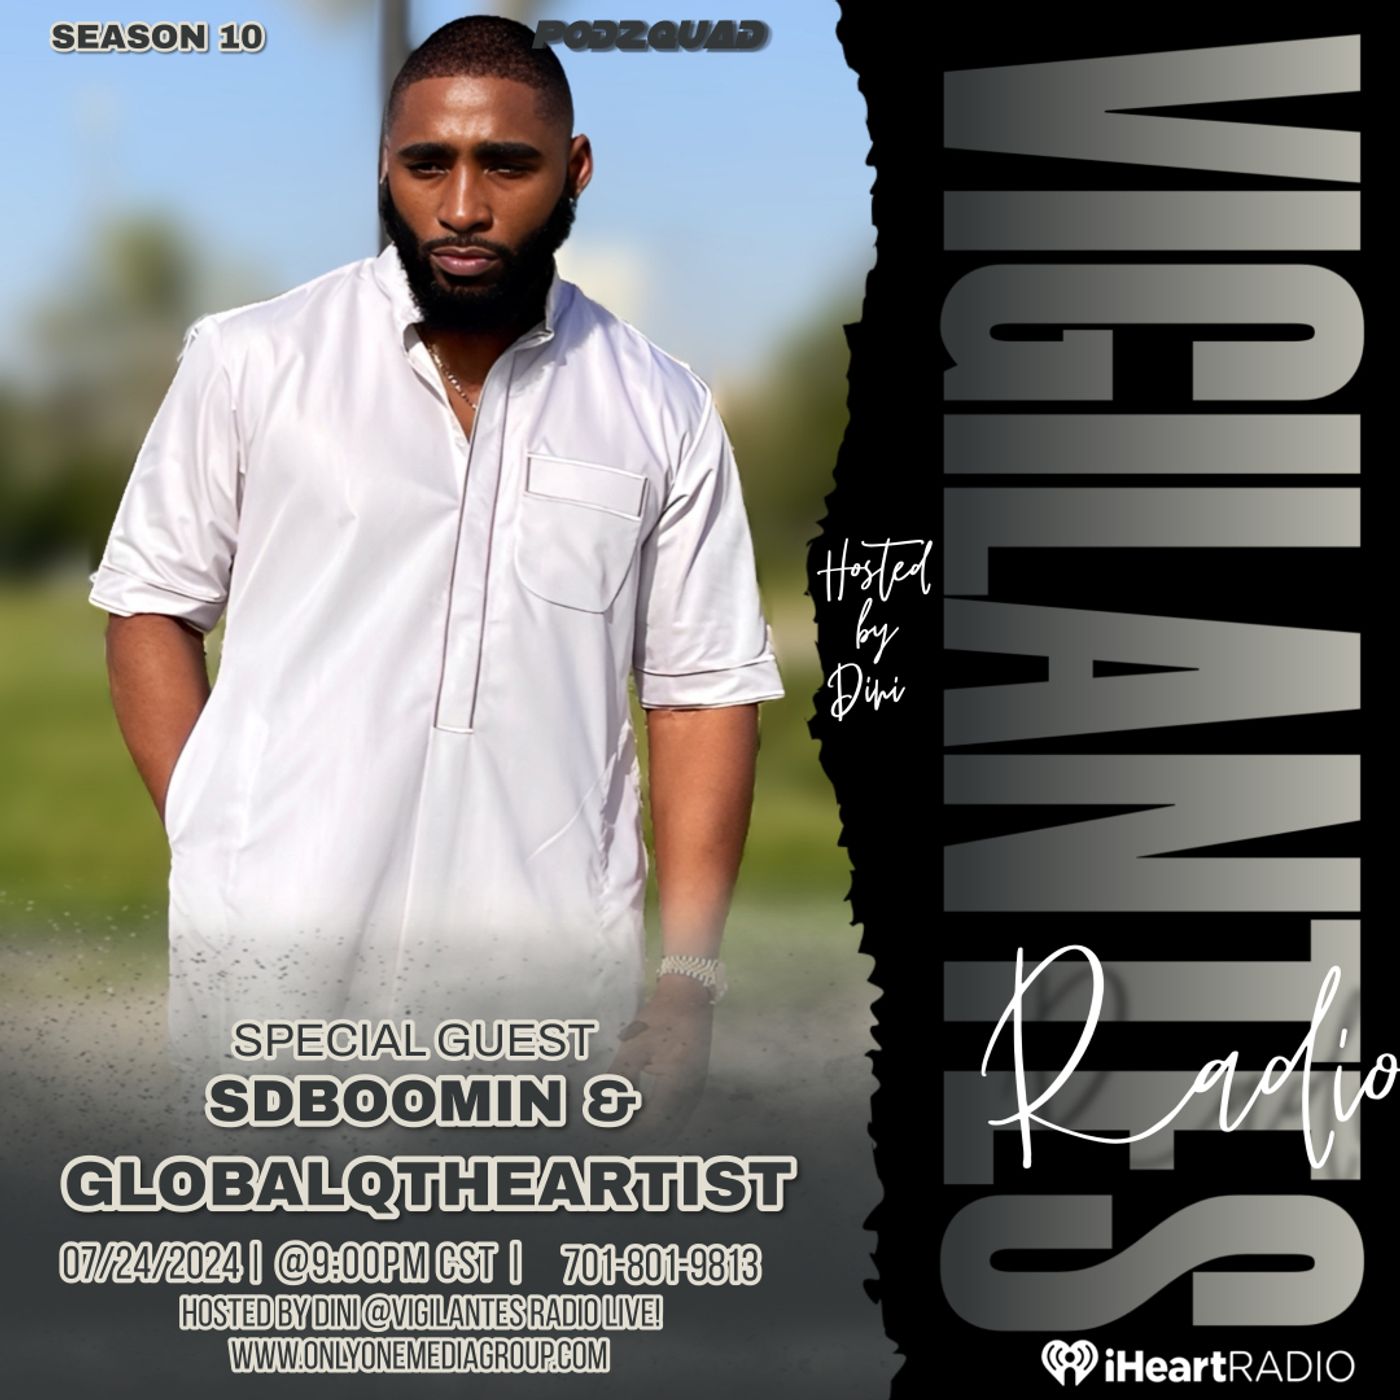 The SDBoomin & Globalqtheartist Interview.